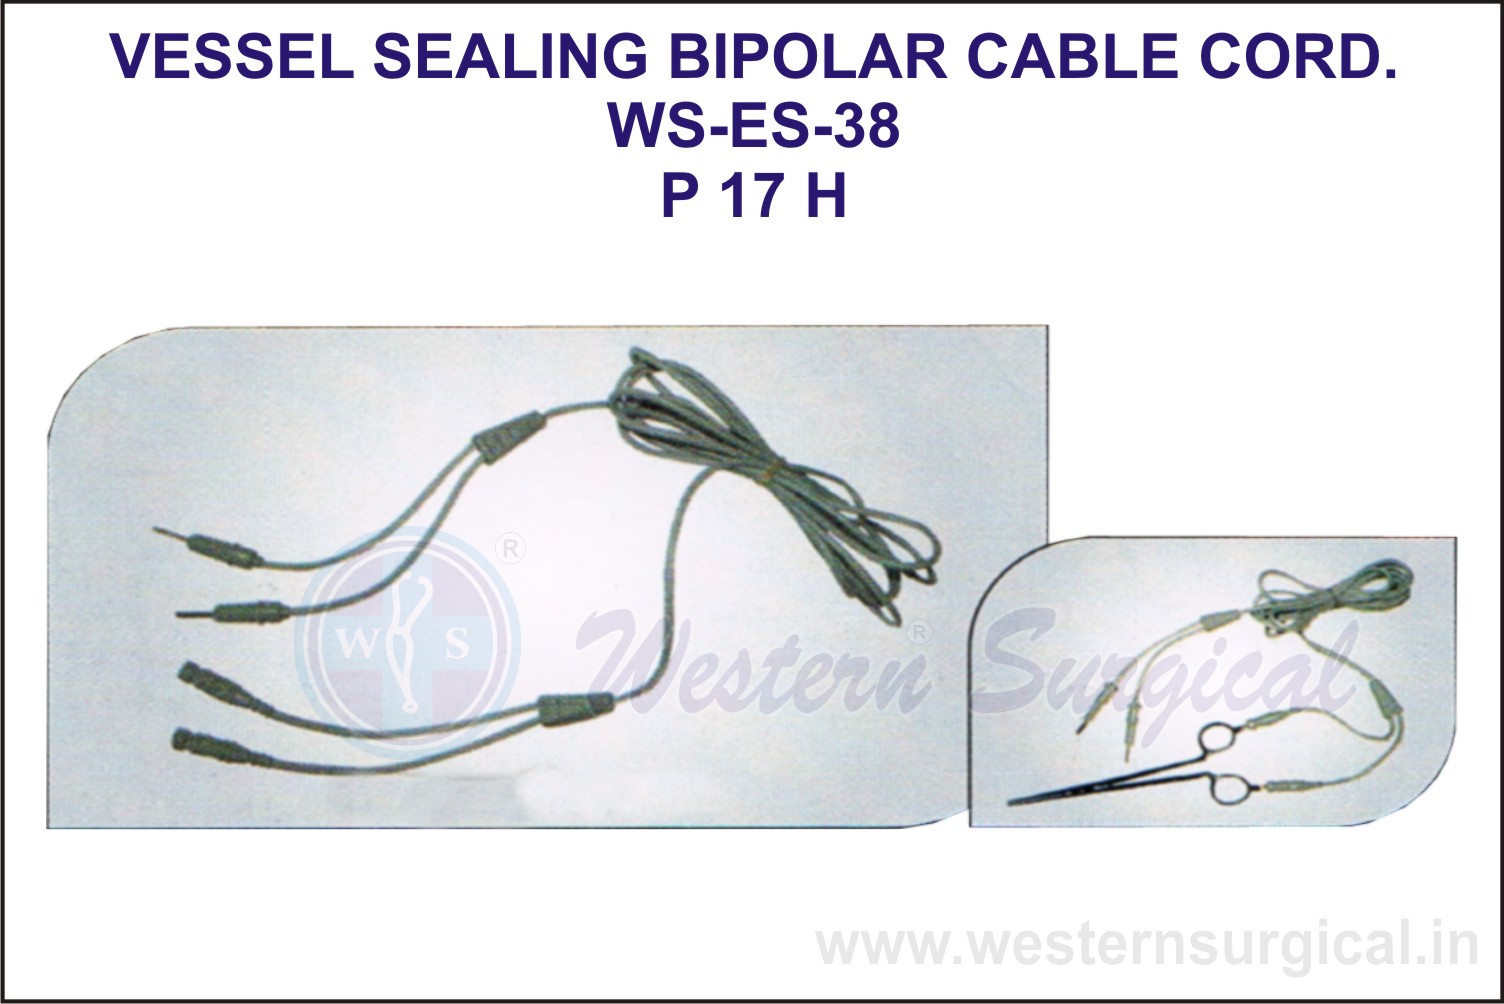 Vessel Sealing Bipolar Cable Cord